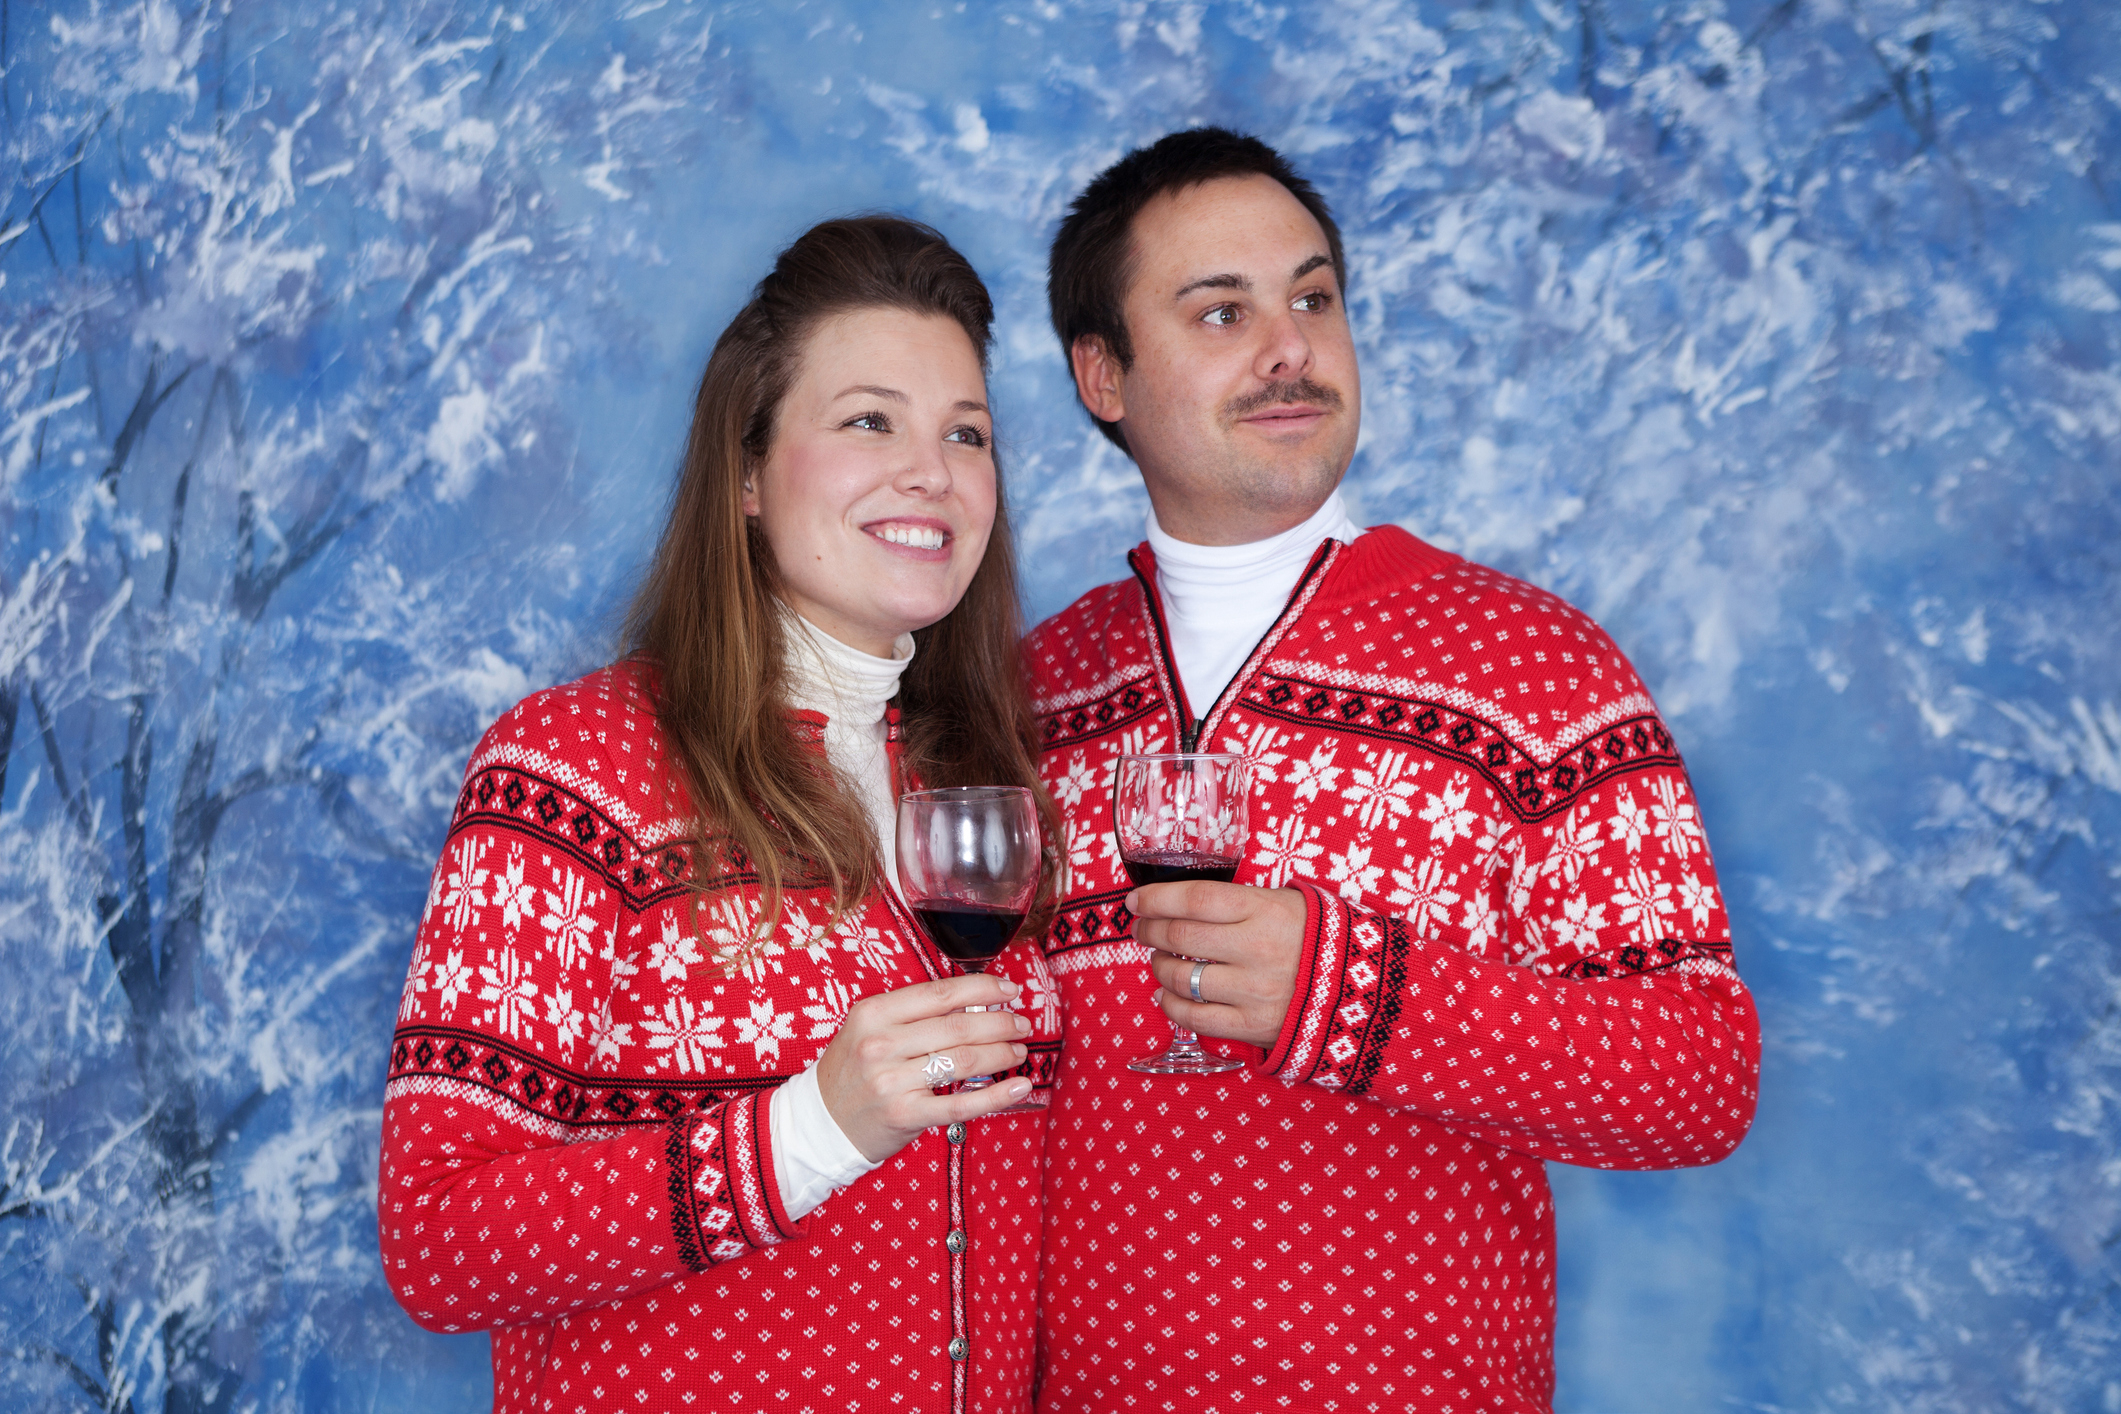 Two people in matching festive sweaters holding wine glasses, smiling, with a winter-themed backdrop